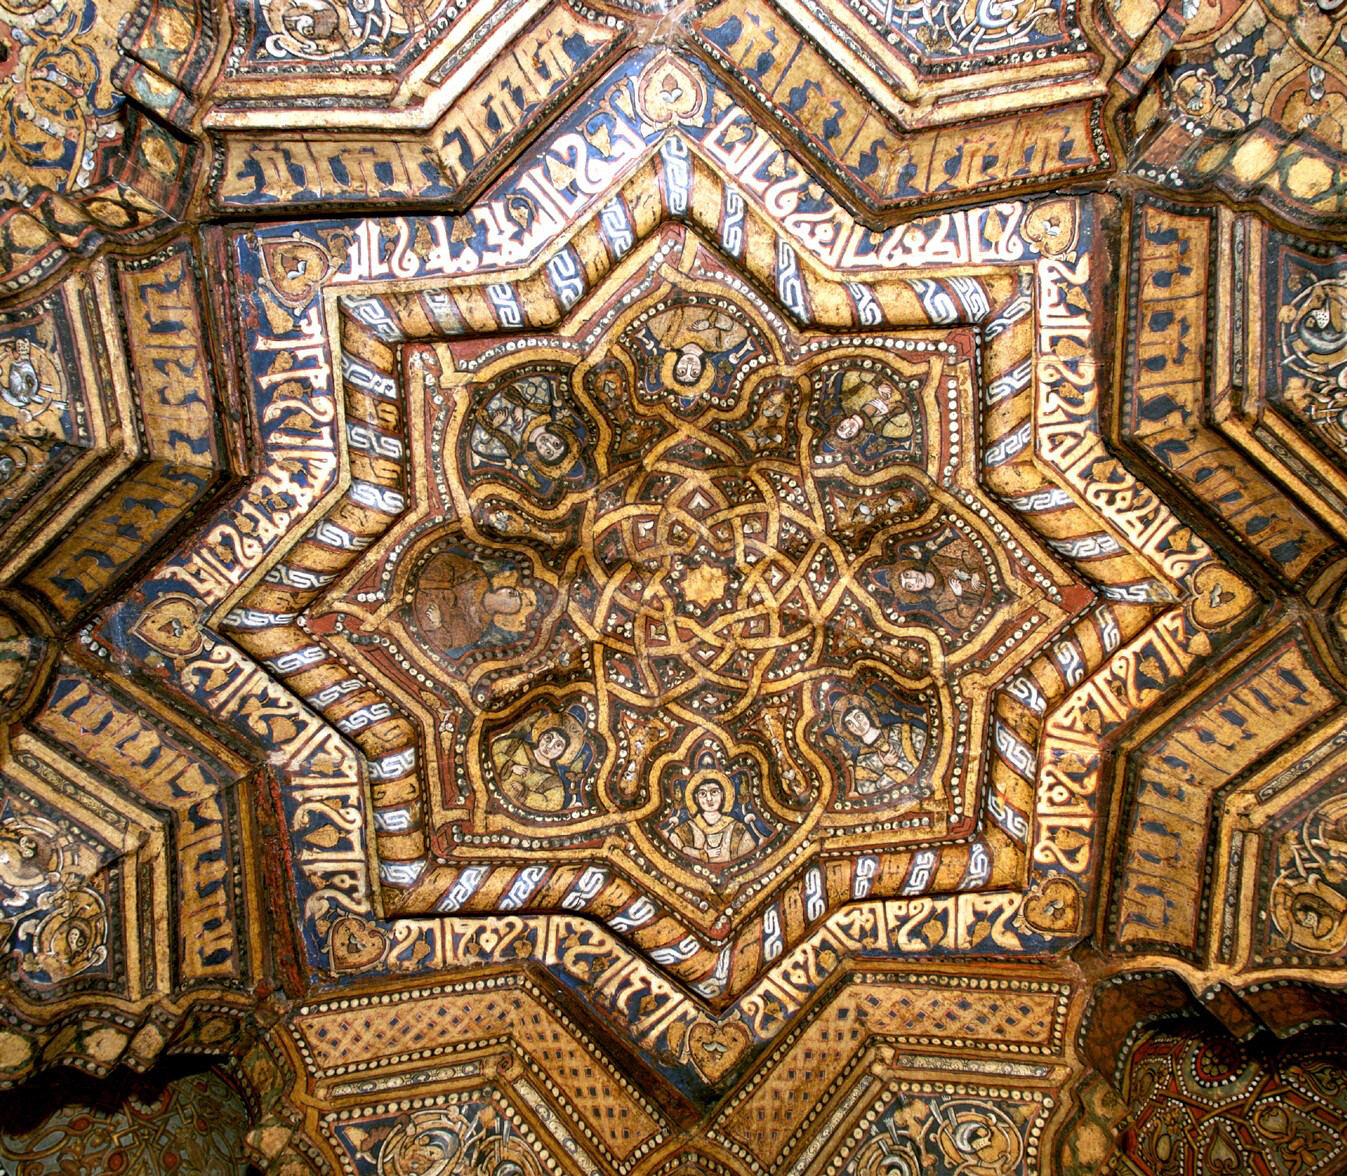 Capella Palatina, Palermo. Muquarnas ceiling, detail of eight-pointed star filled with intertwined bands.